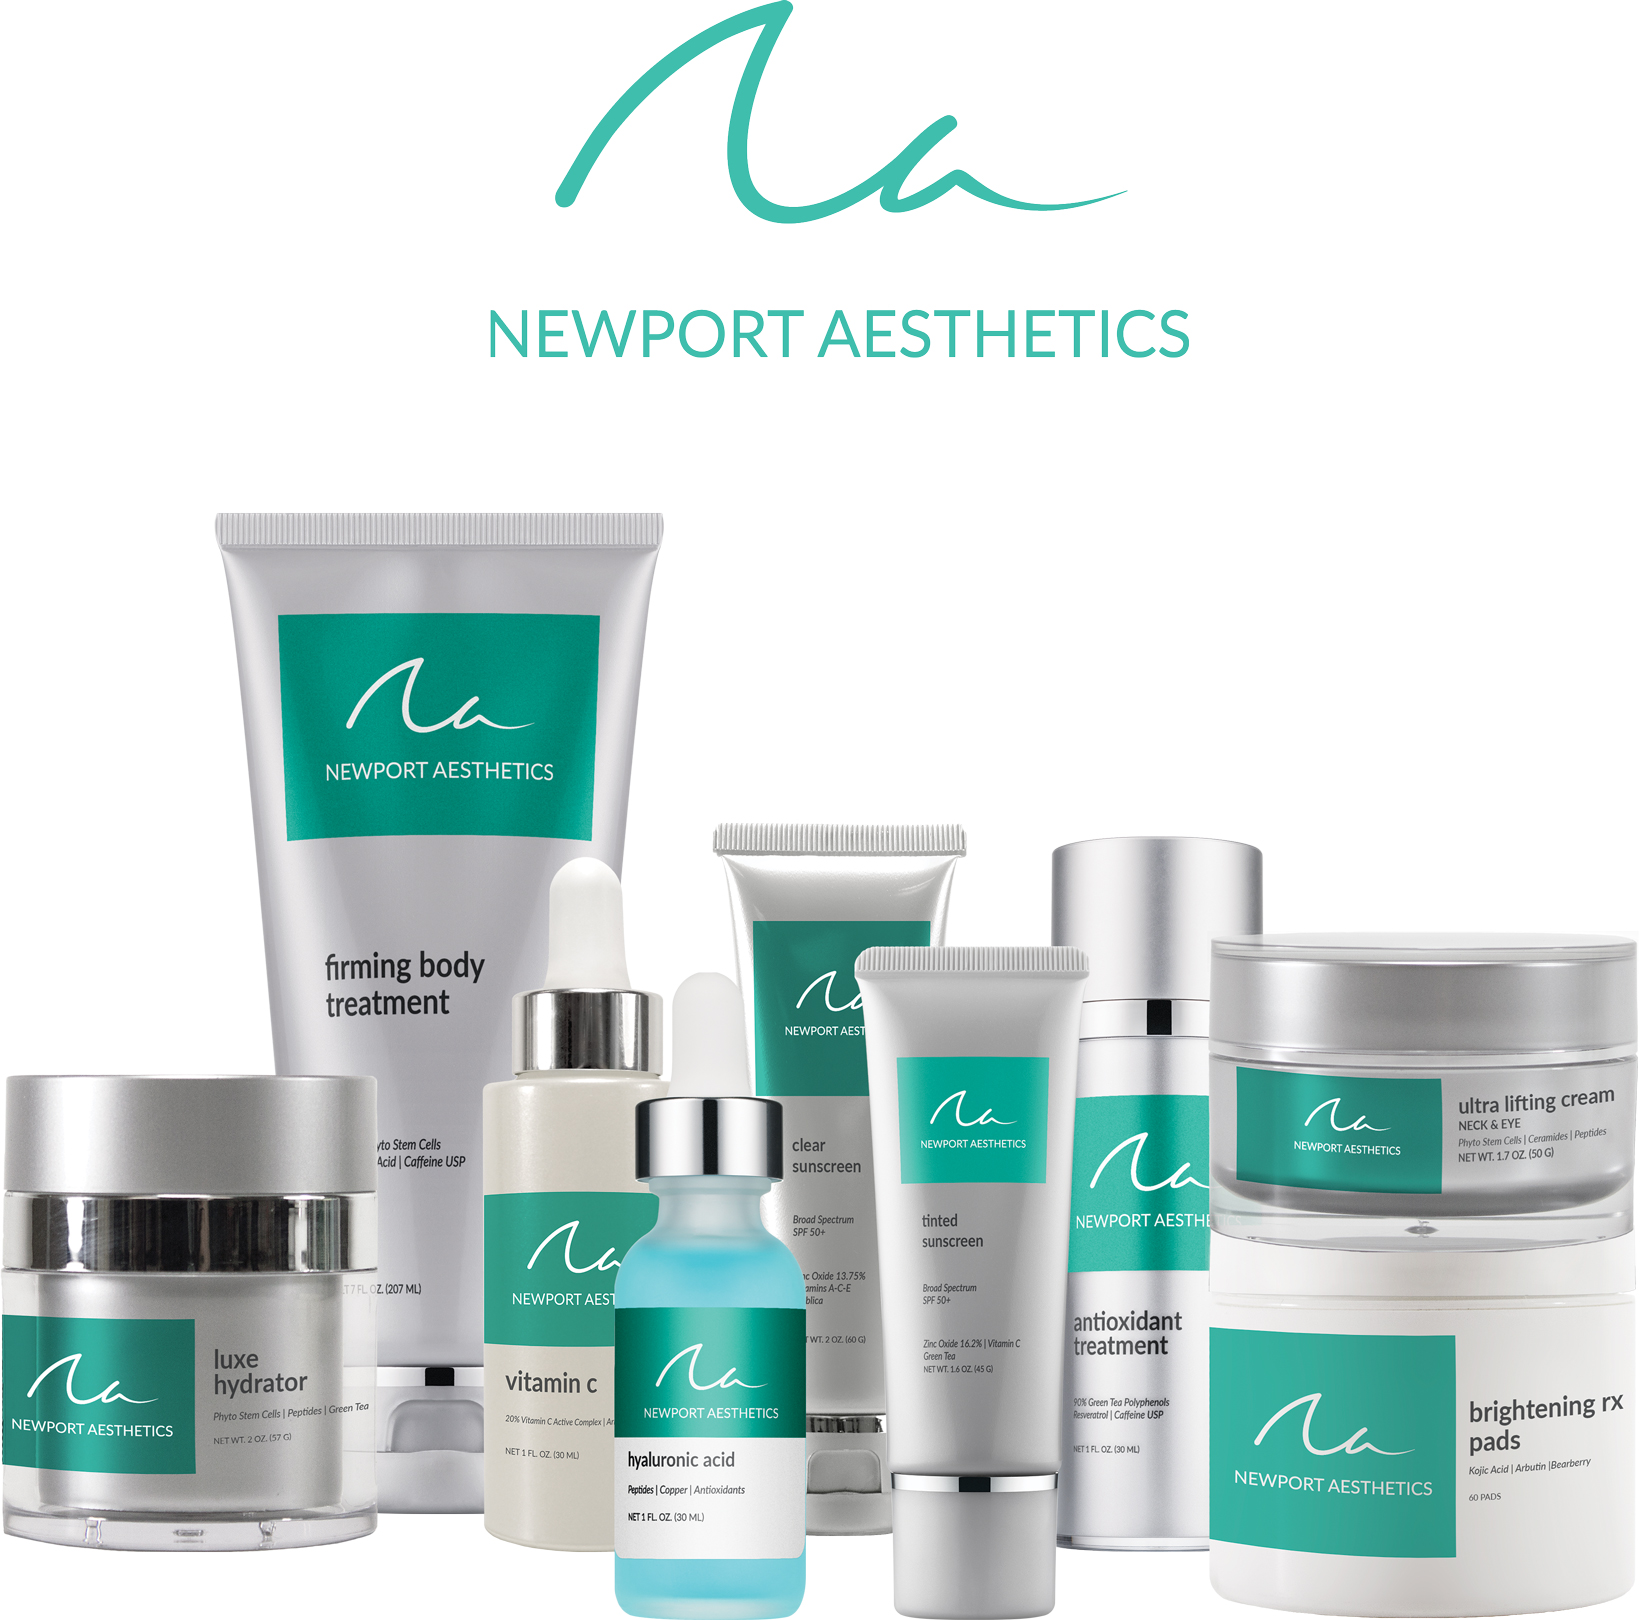 Newport Aesthetics antioxidant cleanser Skin Care Products by Dr Ann Mai MD